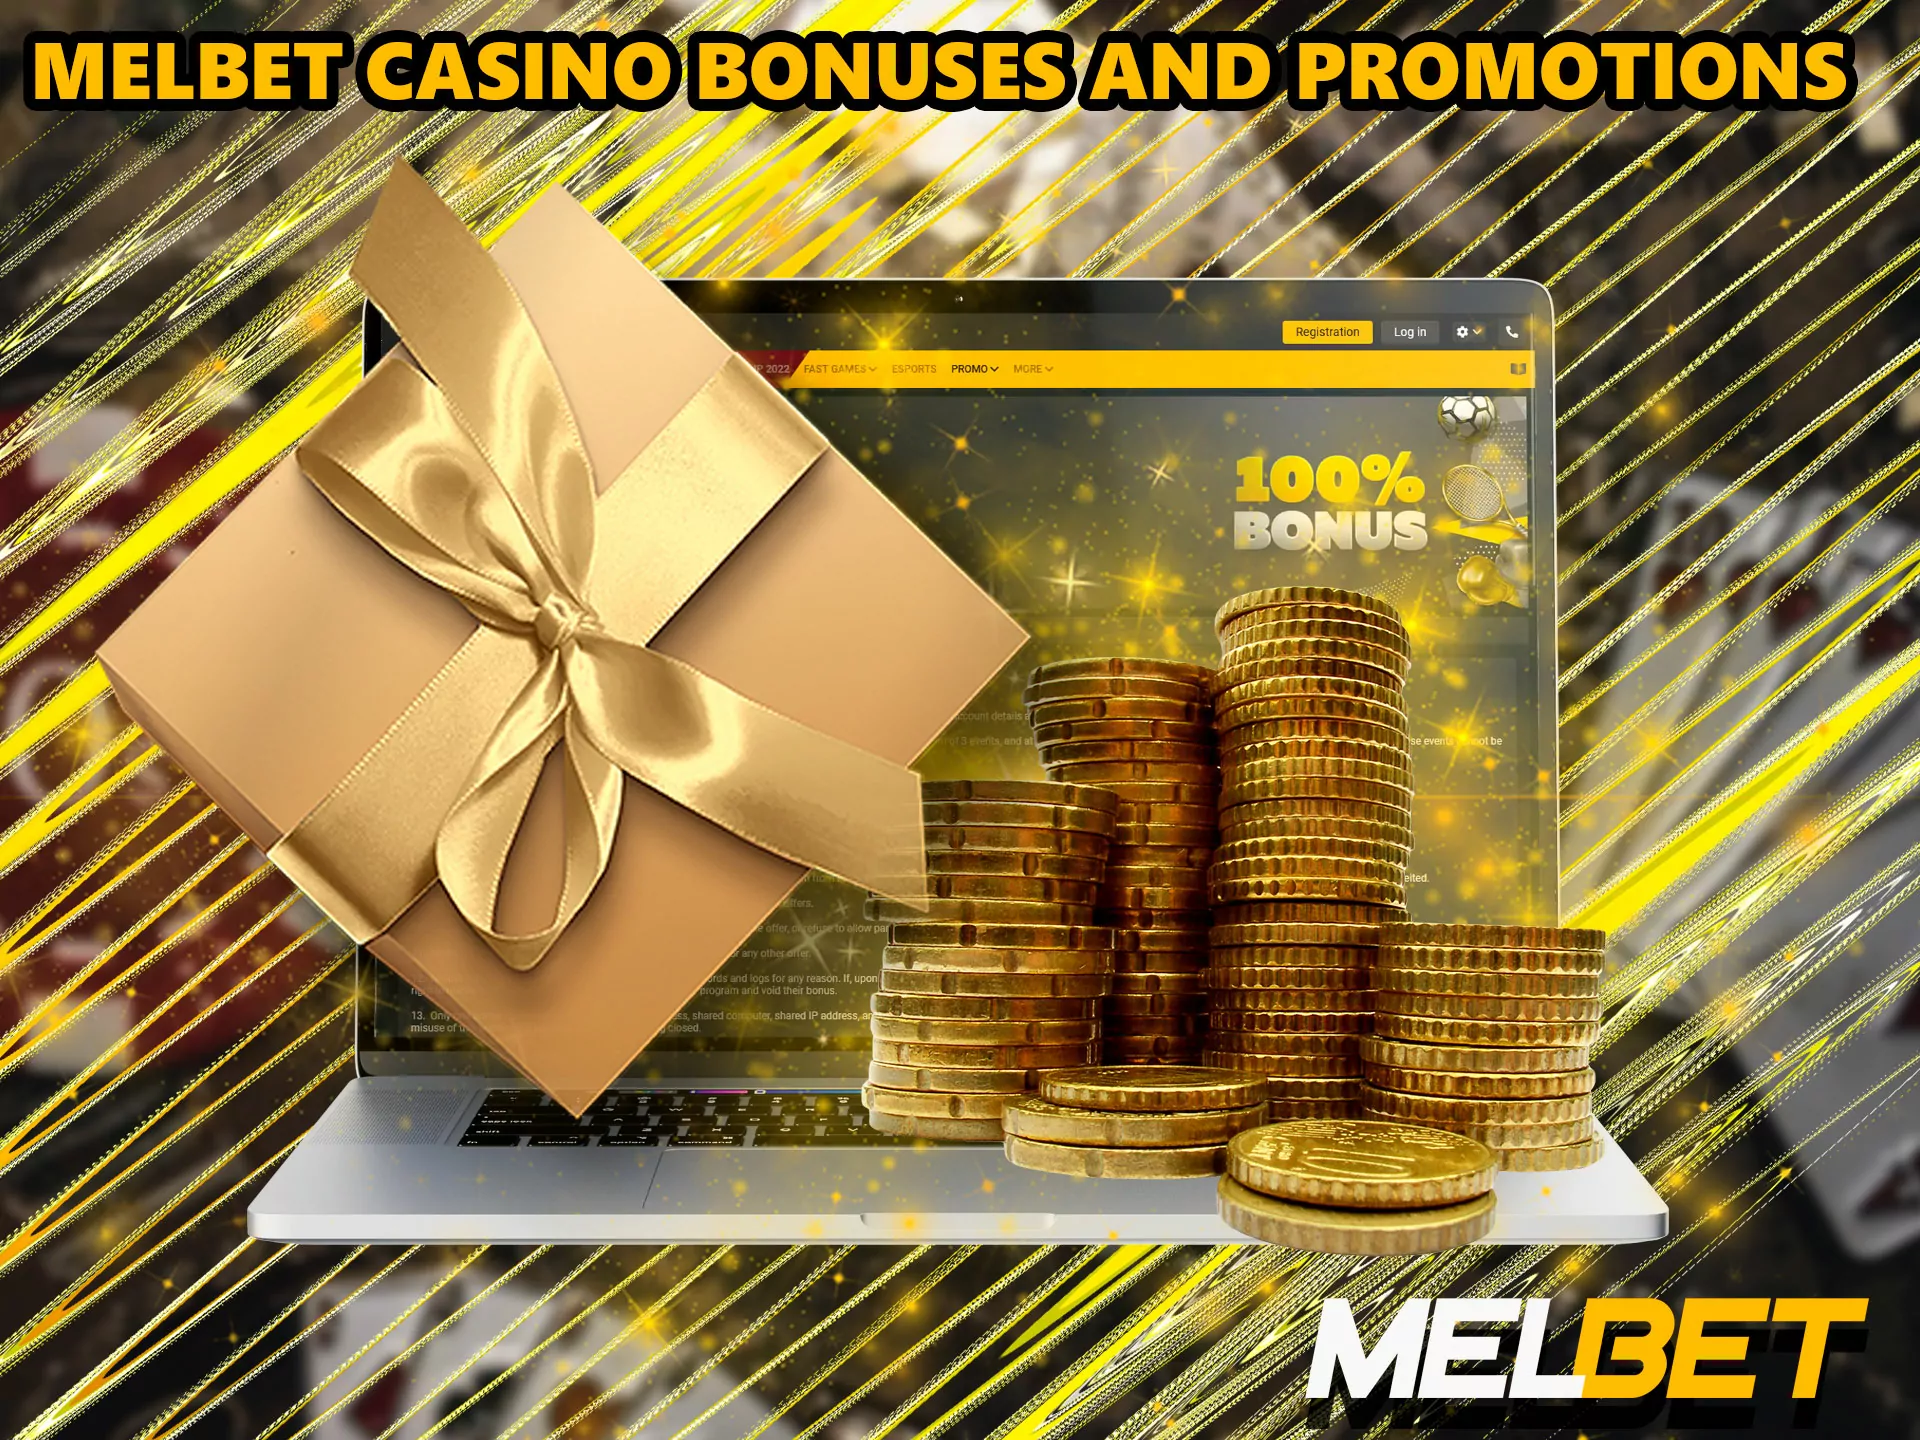 This section will help you get started in the game faster, learn more about it in this Melbet casino review.